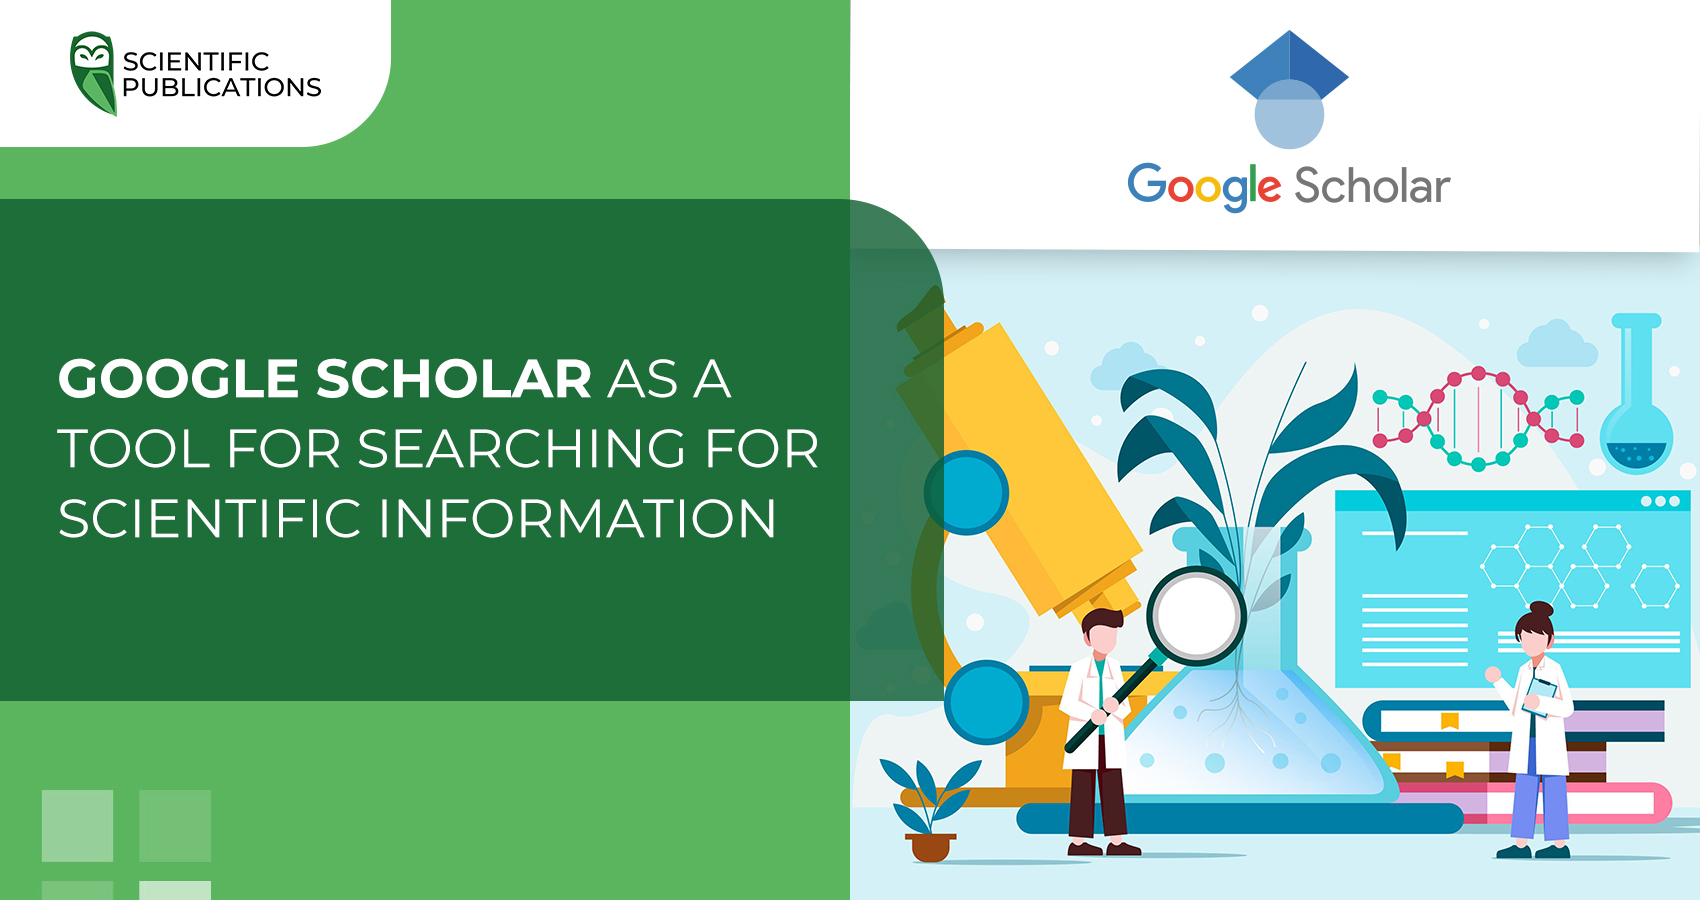 Google Scholar as a tool for finding scientific information